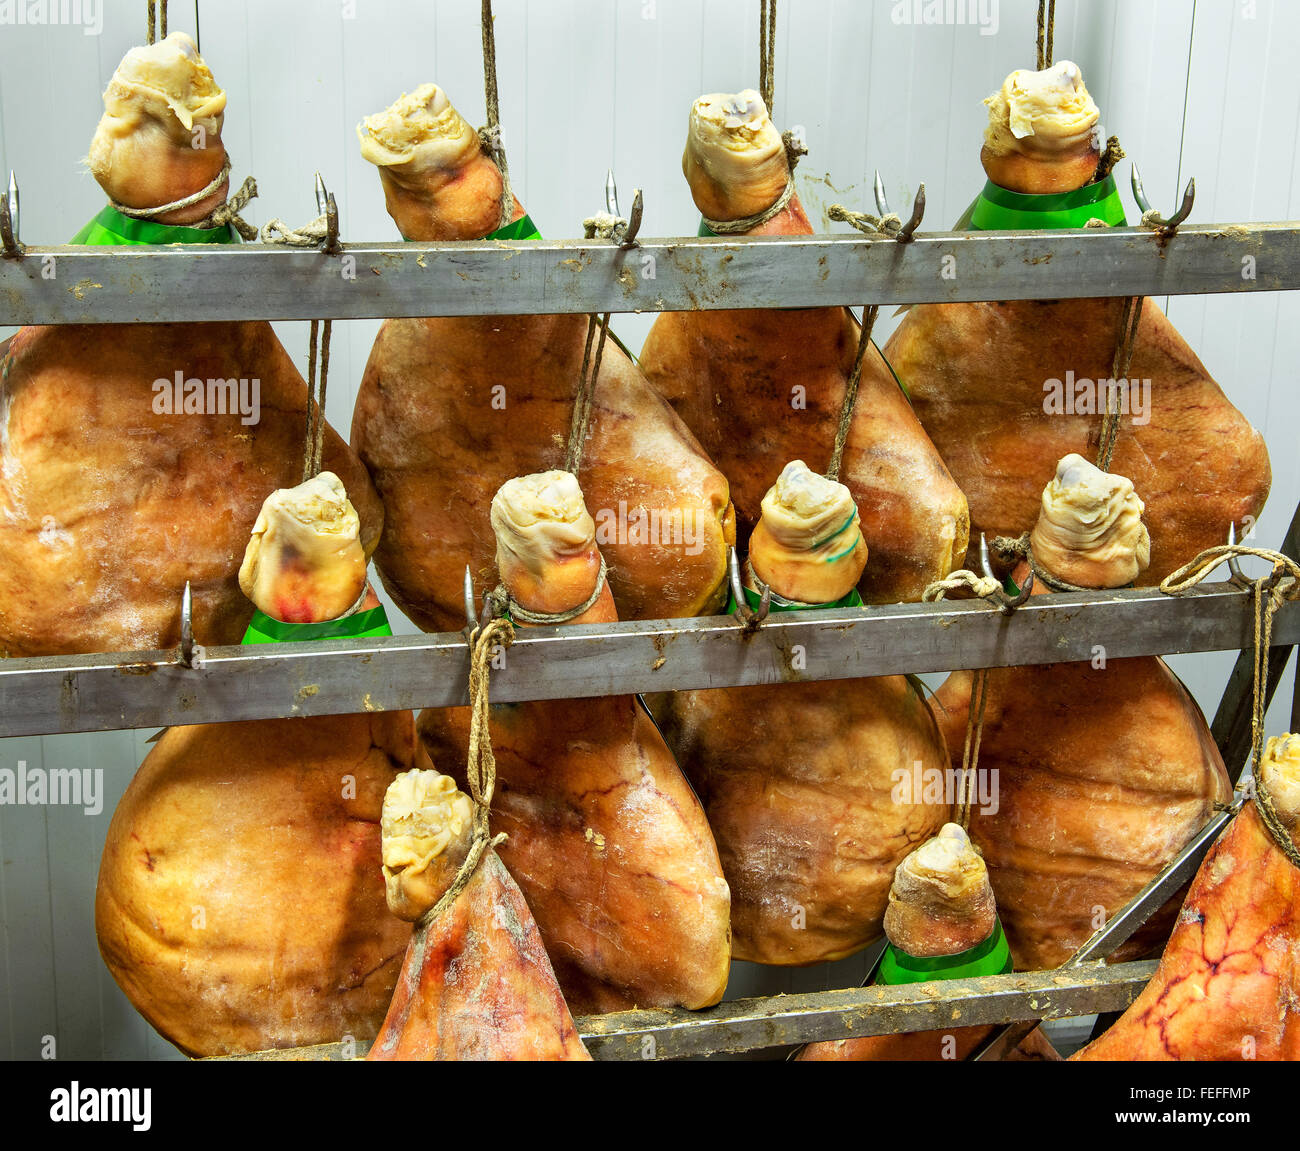 Italian Parma or prosciutto hams hanging on meat hooks Stock Photo